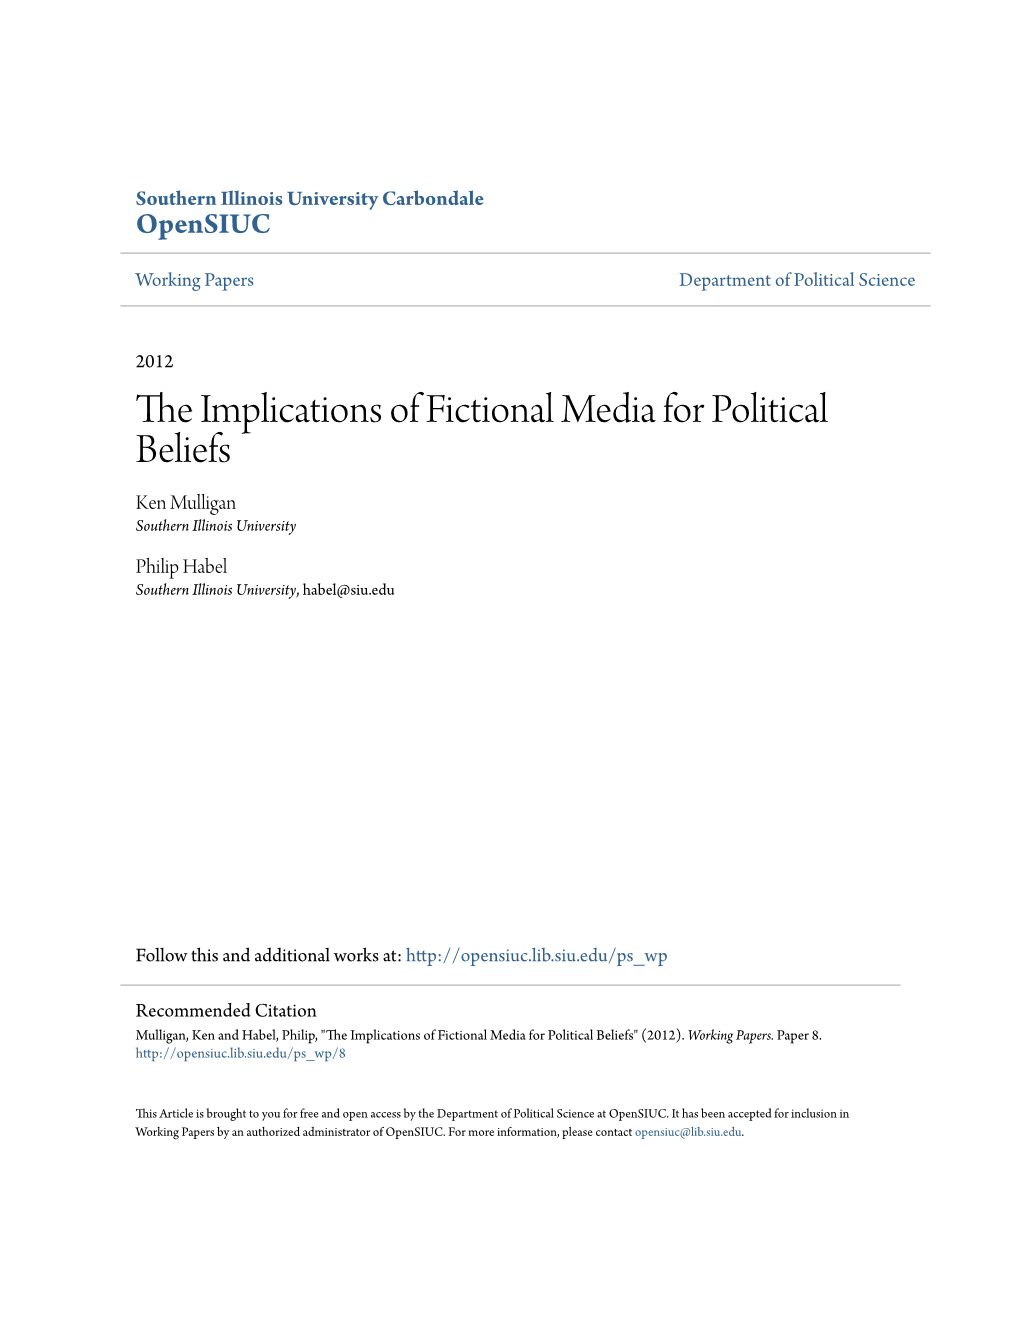 The Implications of Fictional Media for Political Beliefs